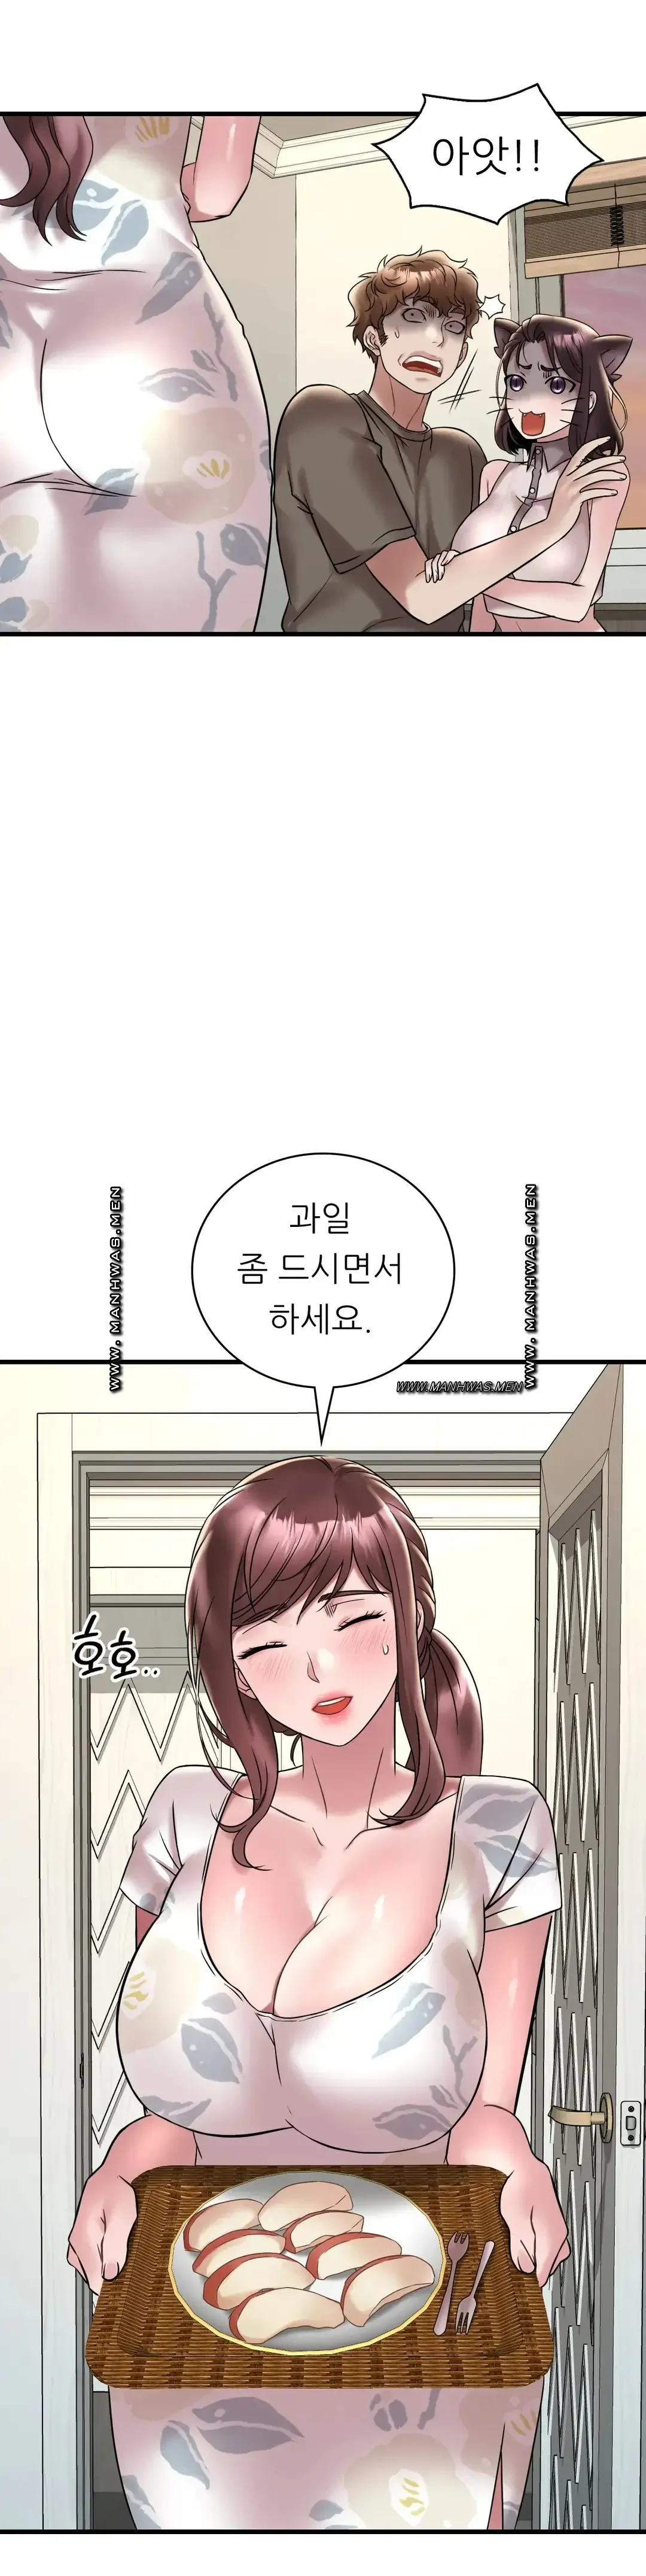 she-wants-to-get-drunk-raw-chap-34-8